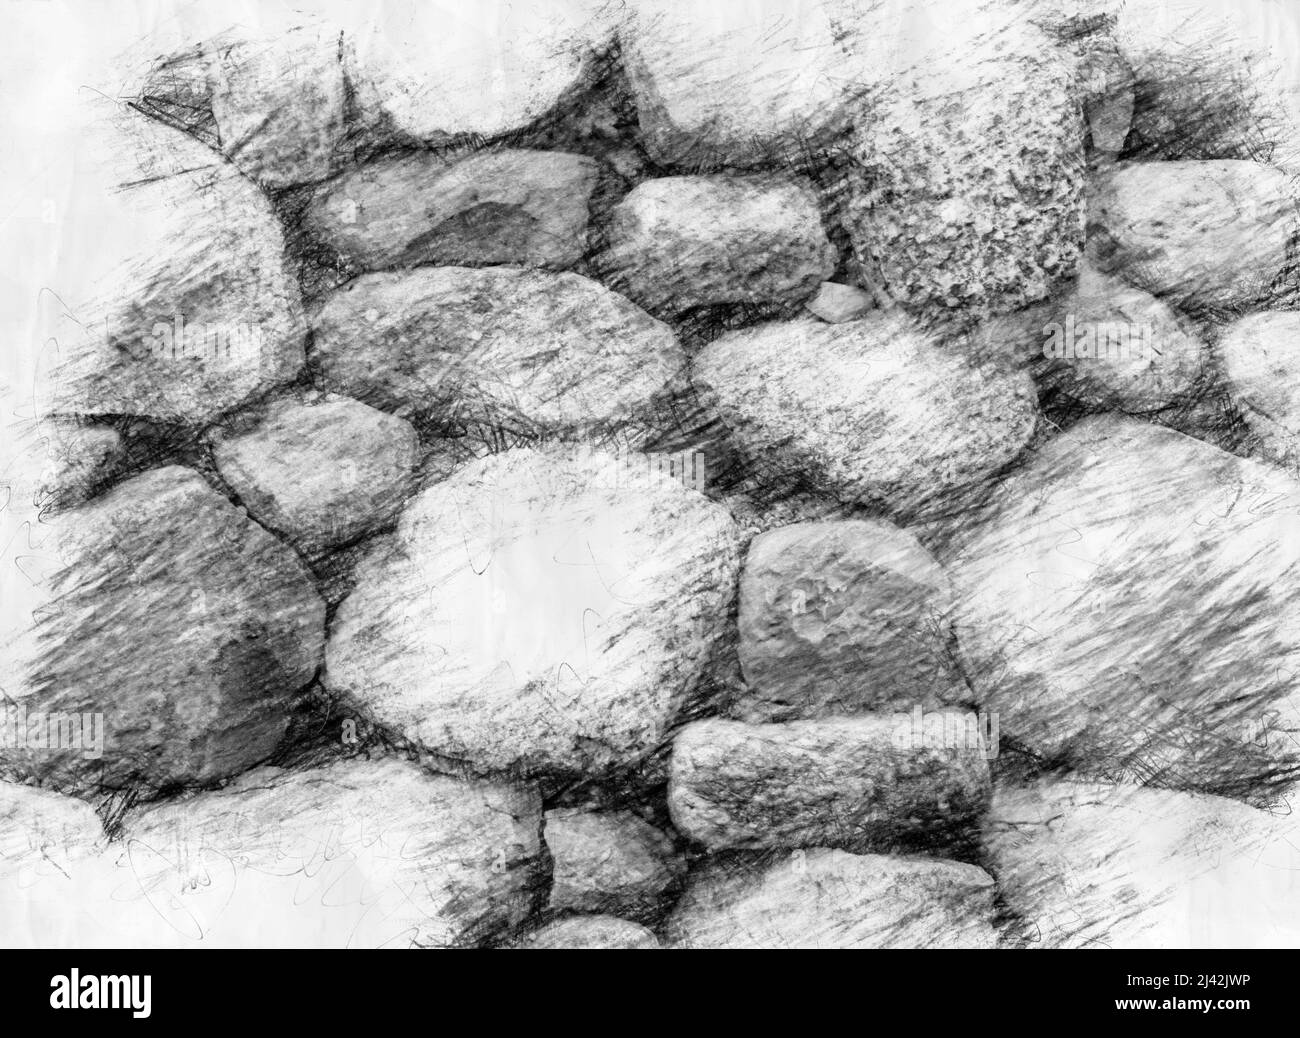 How to Draw a Whole in a Brick Wall: Pencil Drawing - YouTube